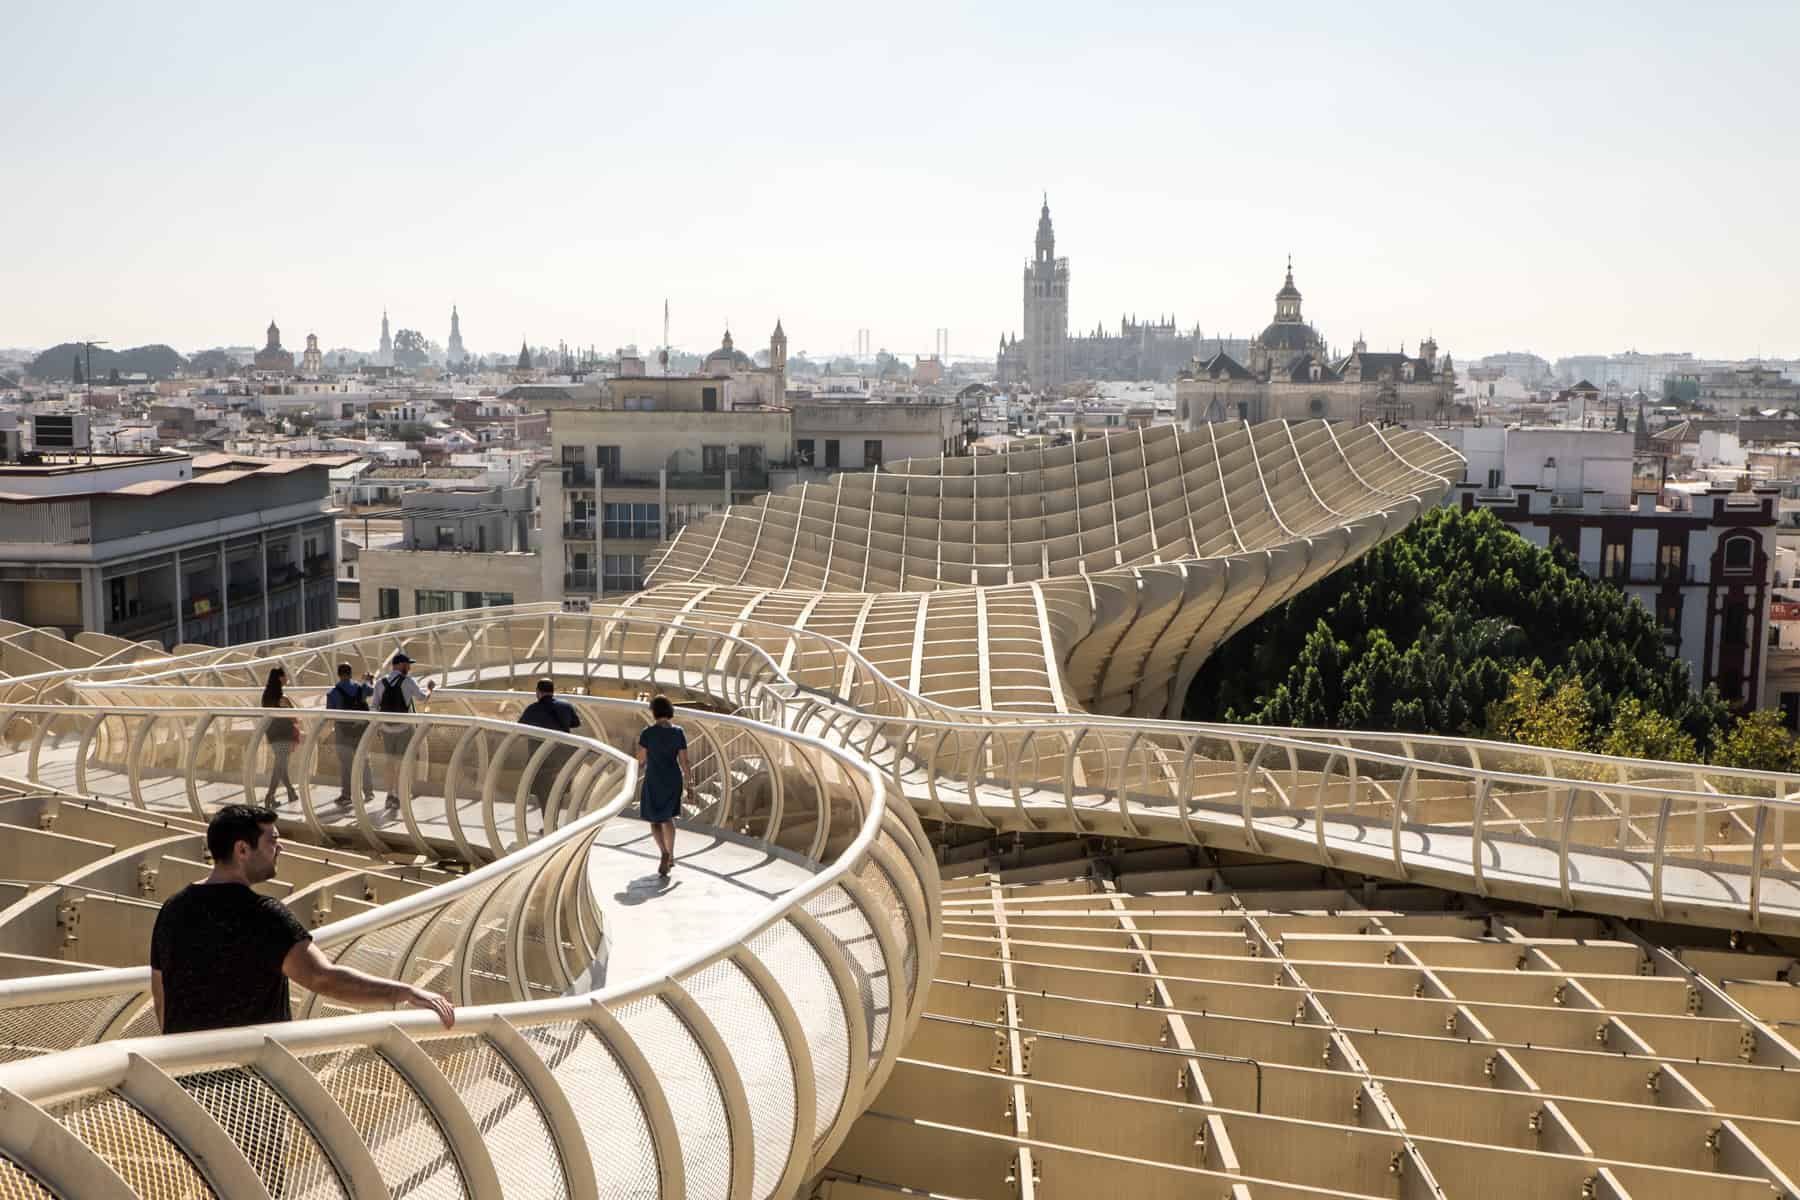 The cream slatted, criss-cross design of the modern artwork in Seville known as Metropol Parasol. These mushroom shaped structures, which people are walking through on curved platforms are elevated to sit in line with the skyline that spreads behind it. 